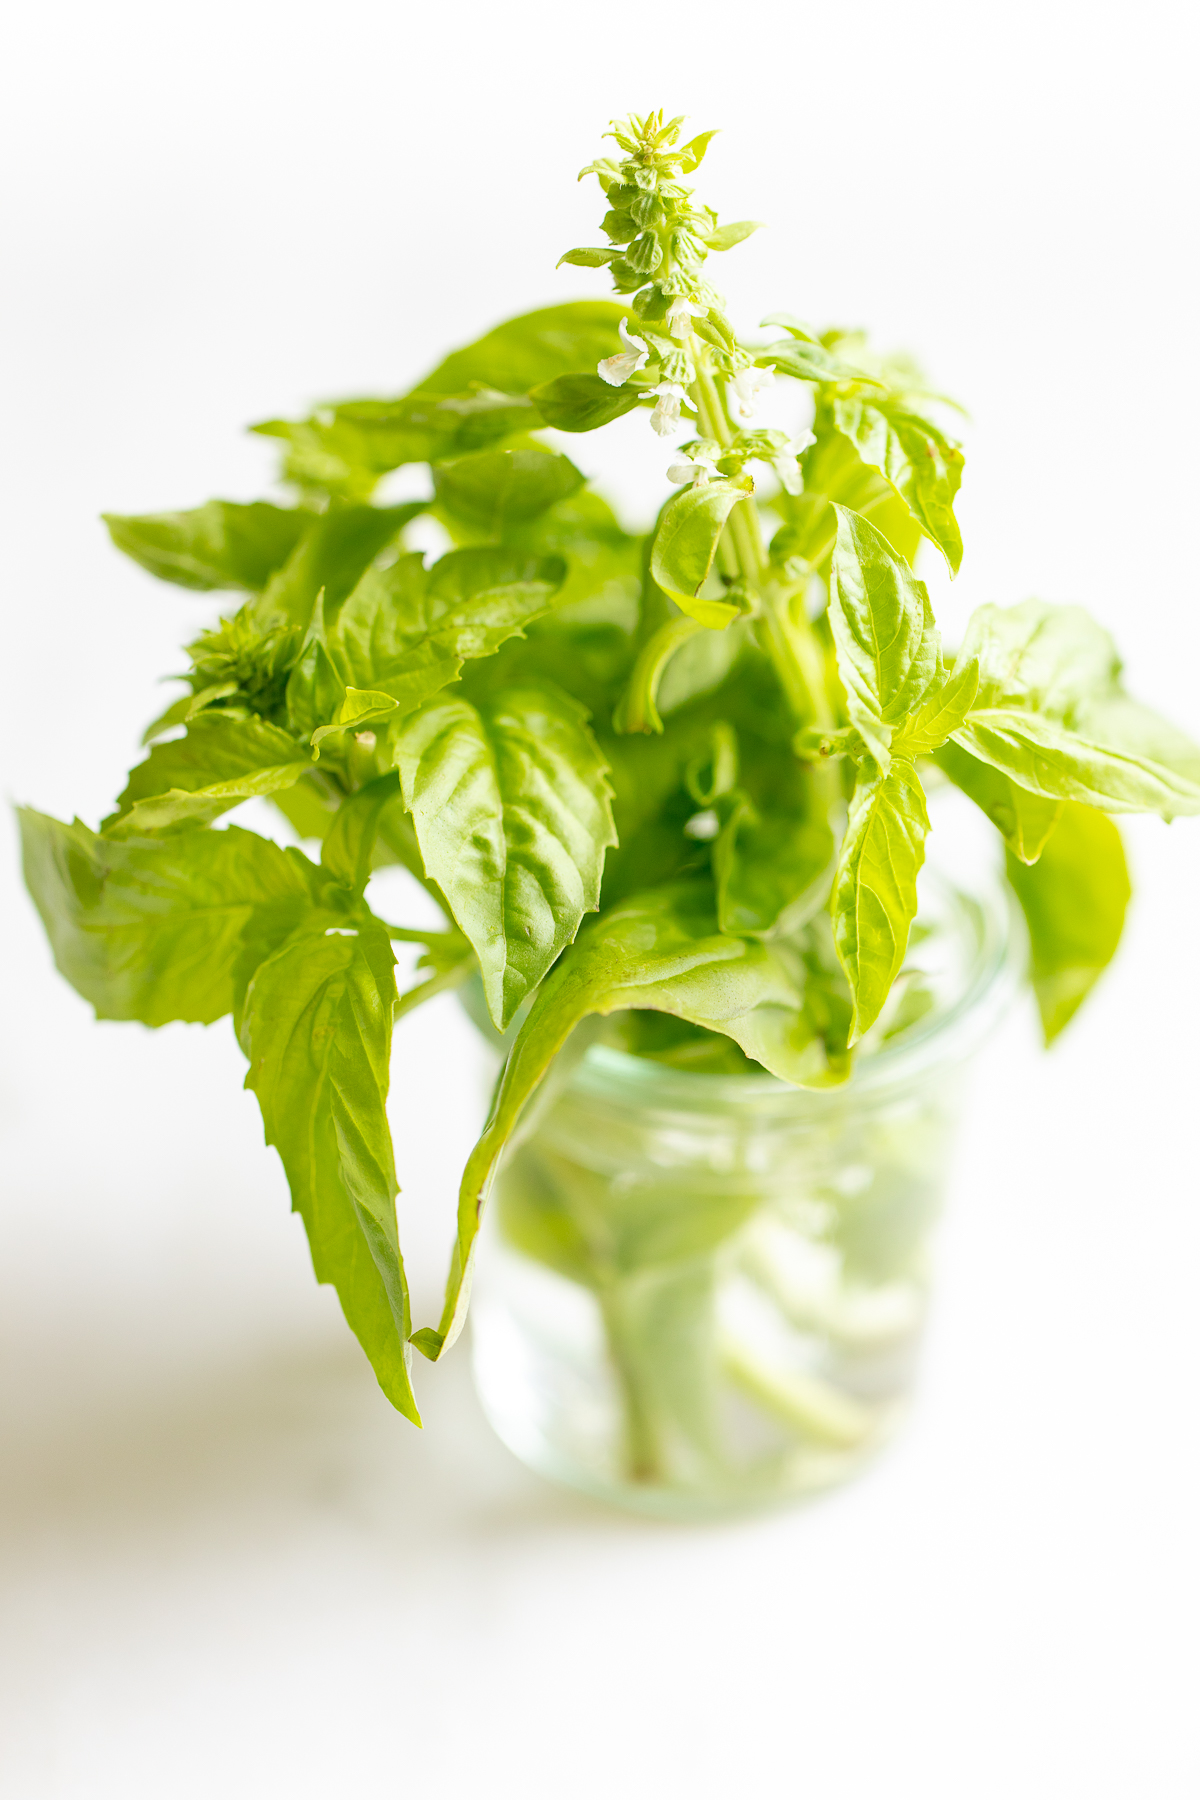 A glass jar filled with fresh basil.